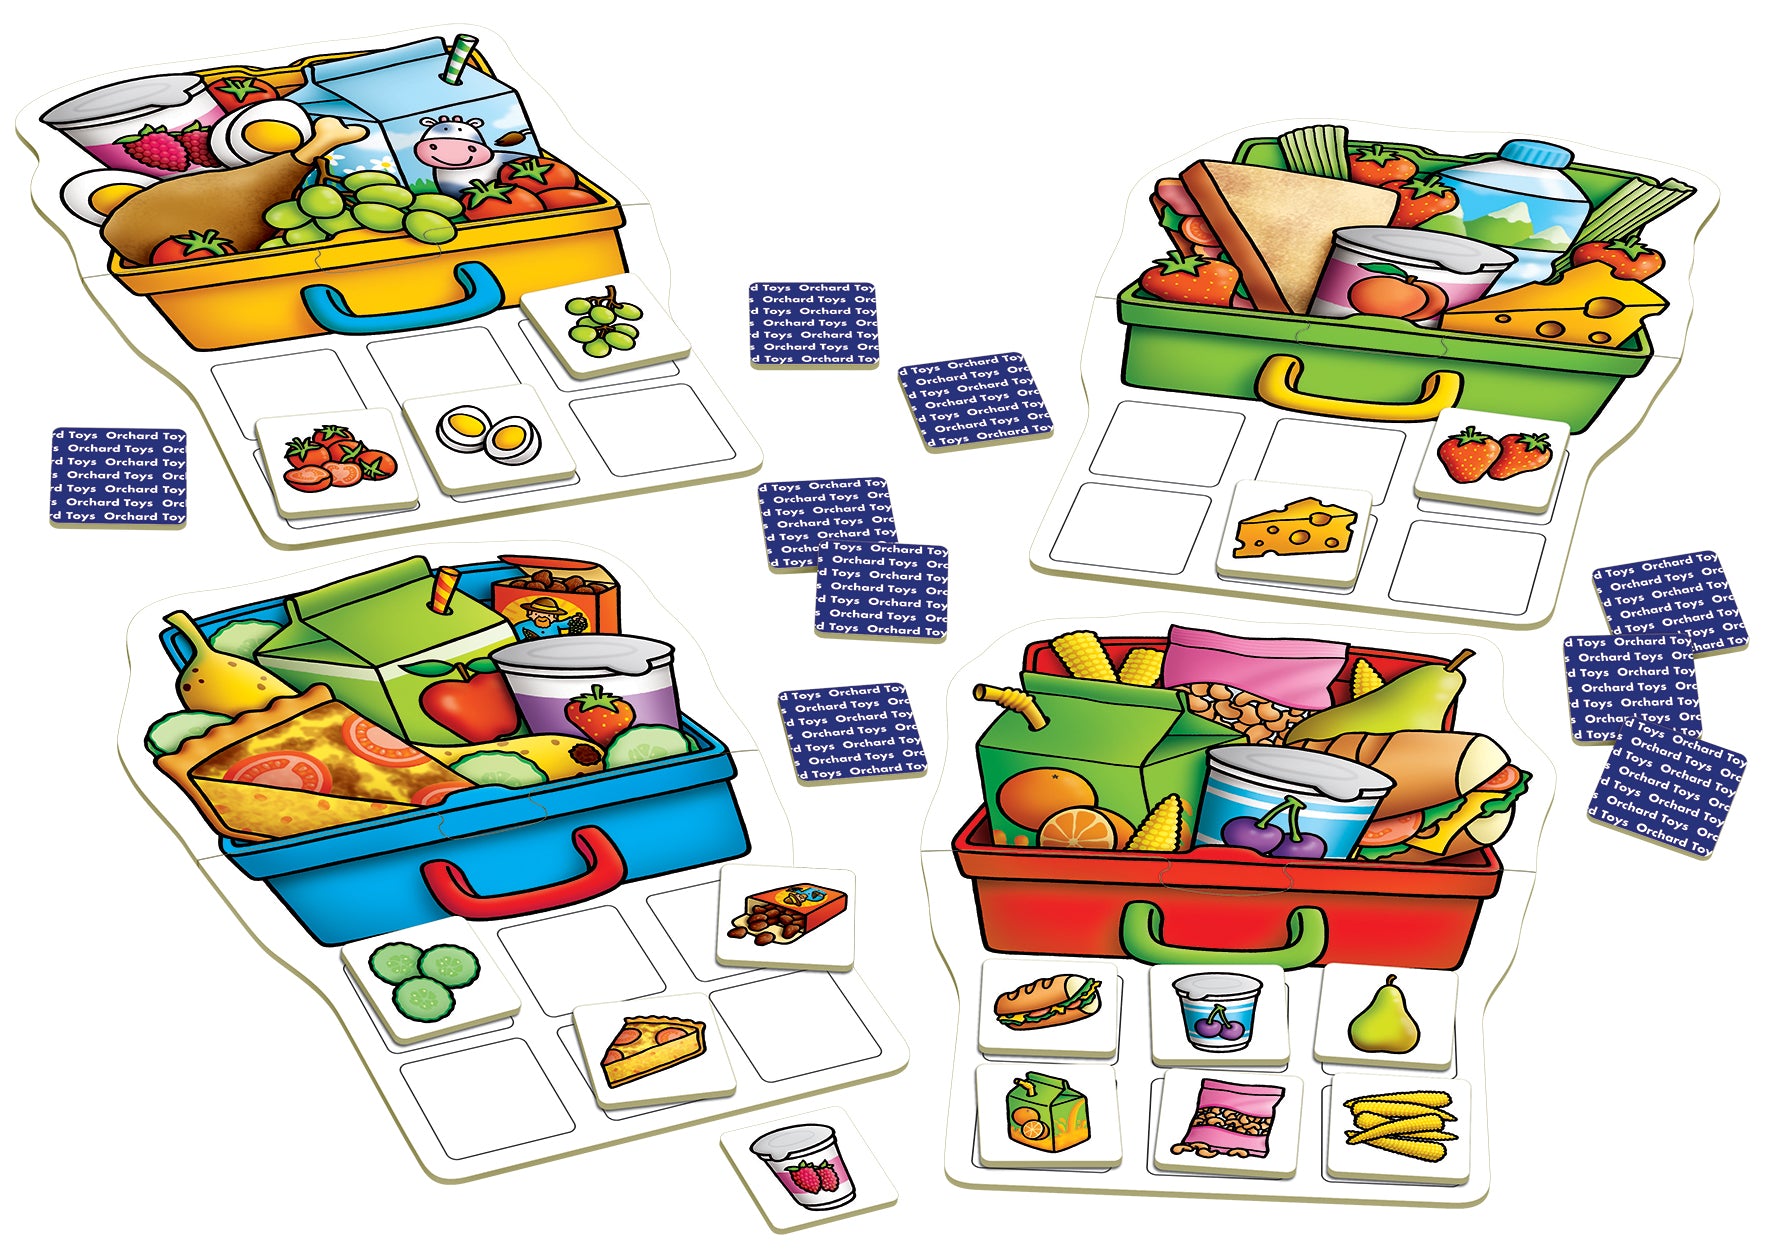 Orchard Lunch Box Game